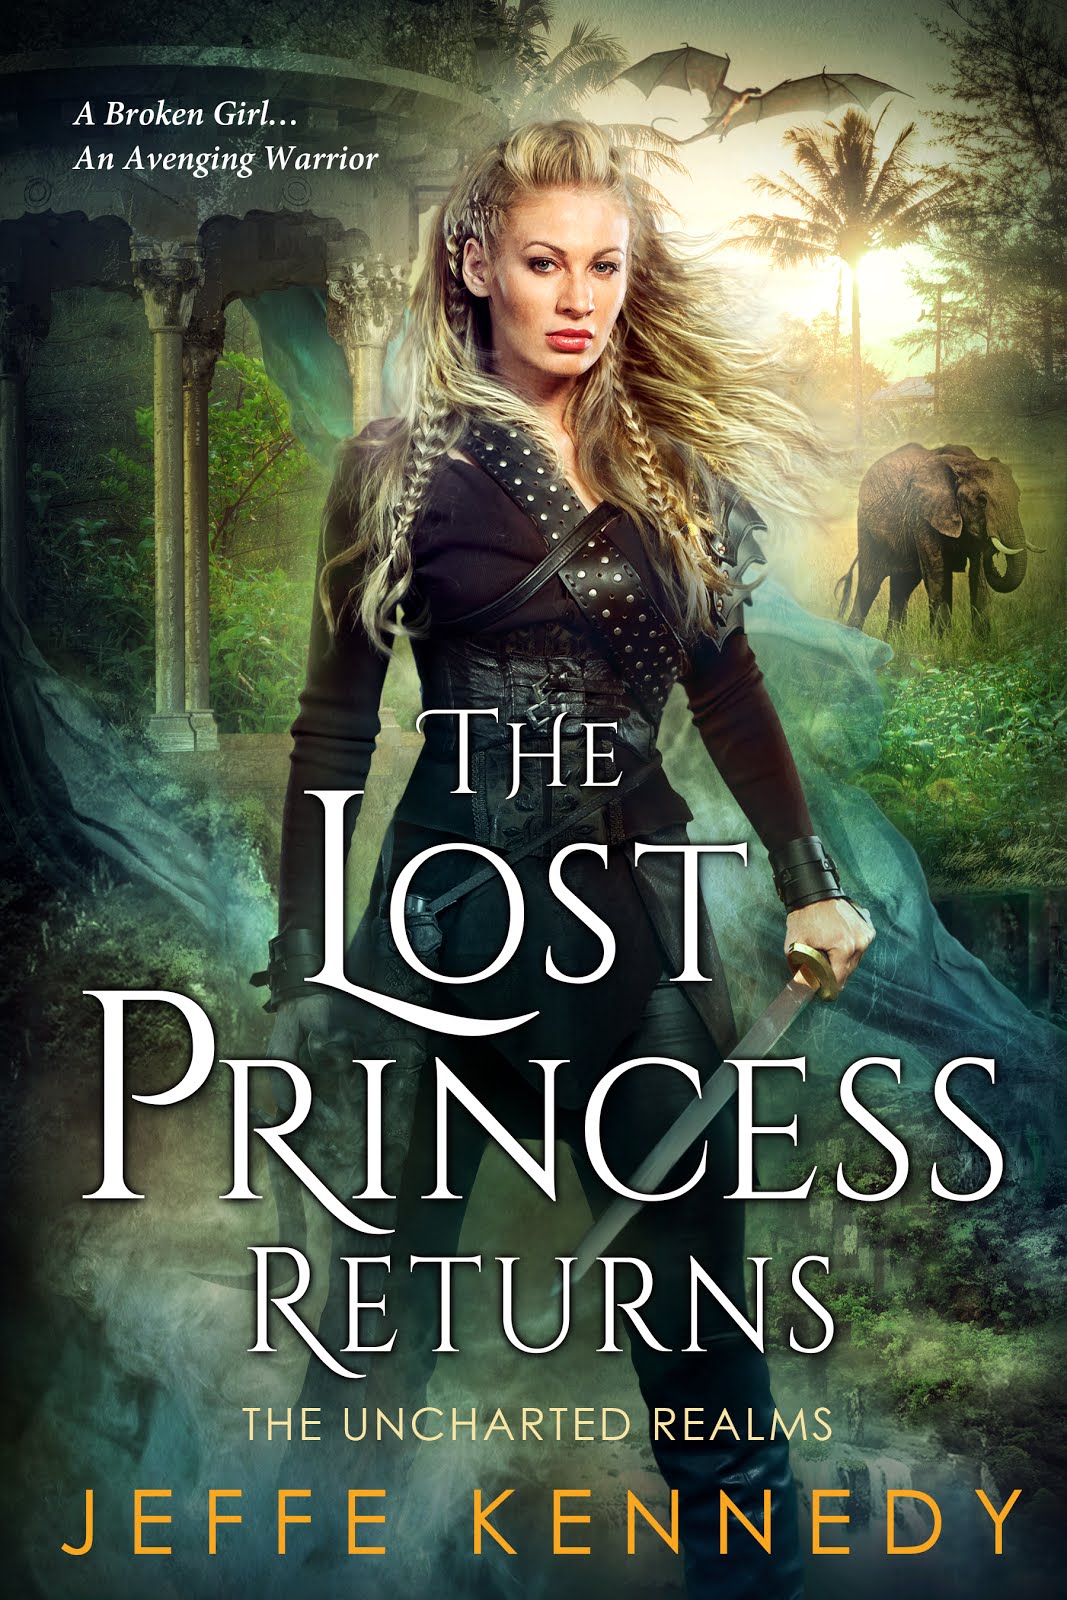 The Lost Princess Returns (The Uncharted Realms)